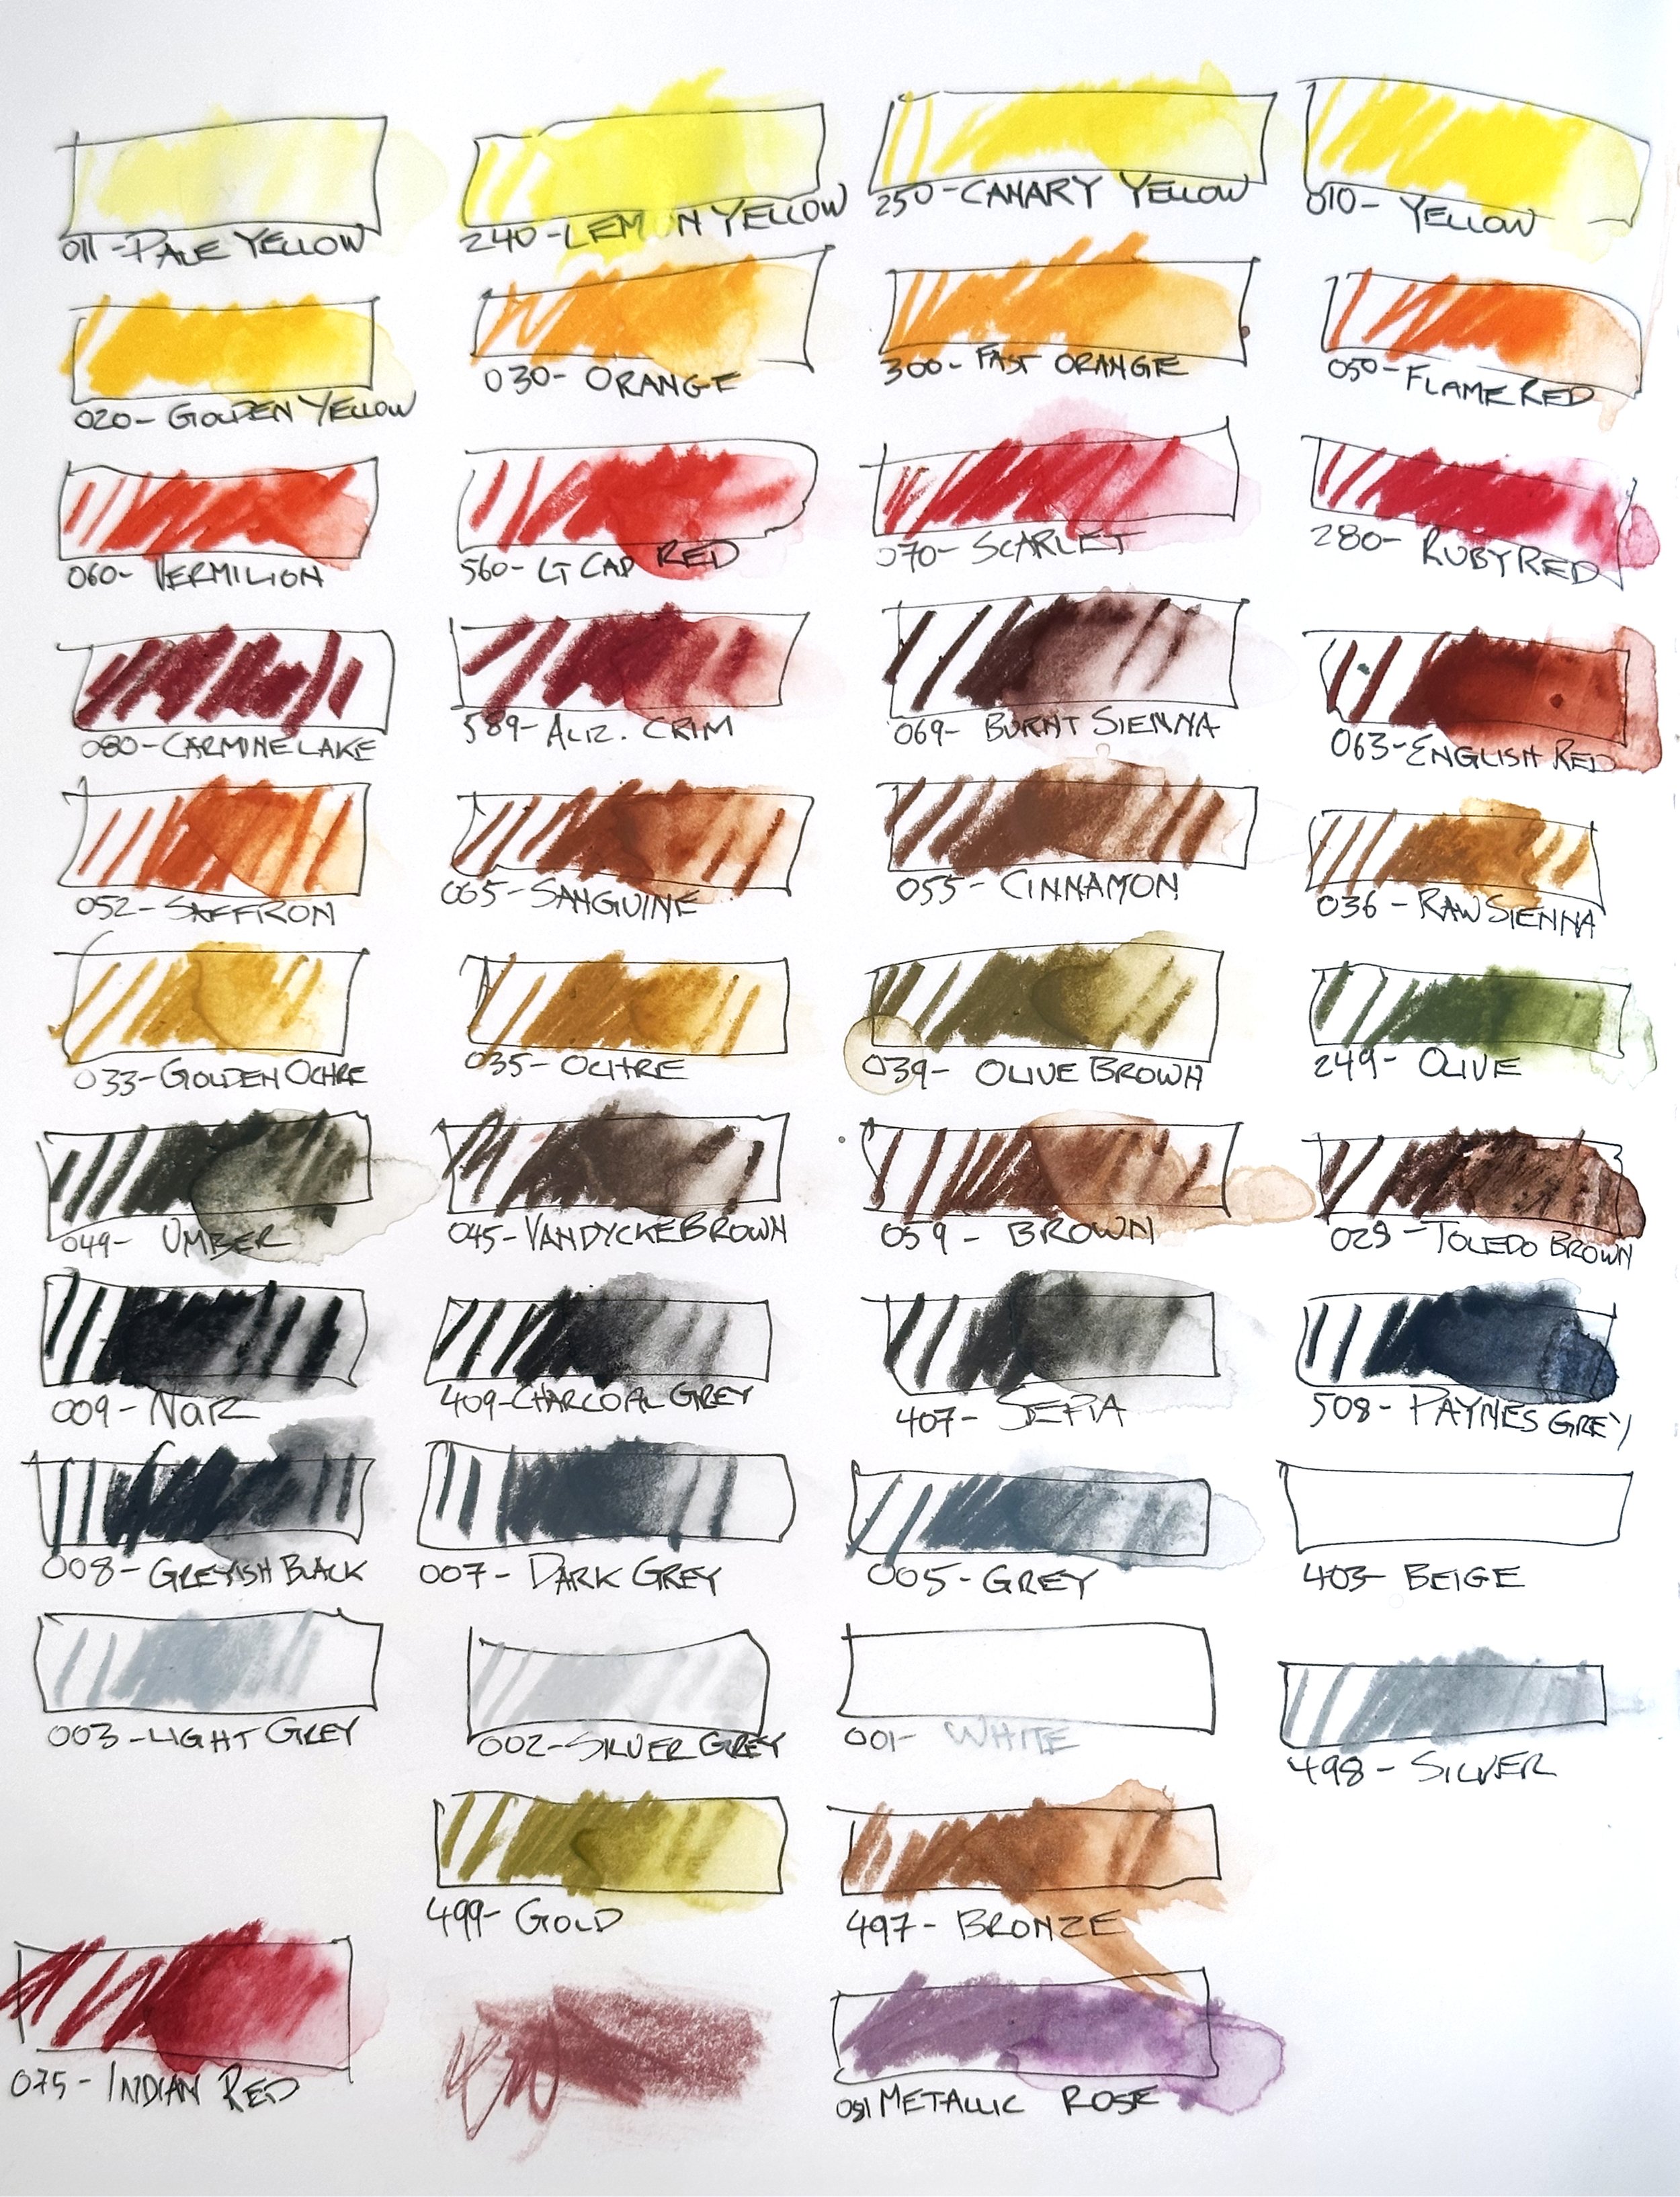 Caran d'Ache Neocolor II Swatches, Christiane Nicely